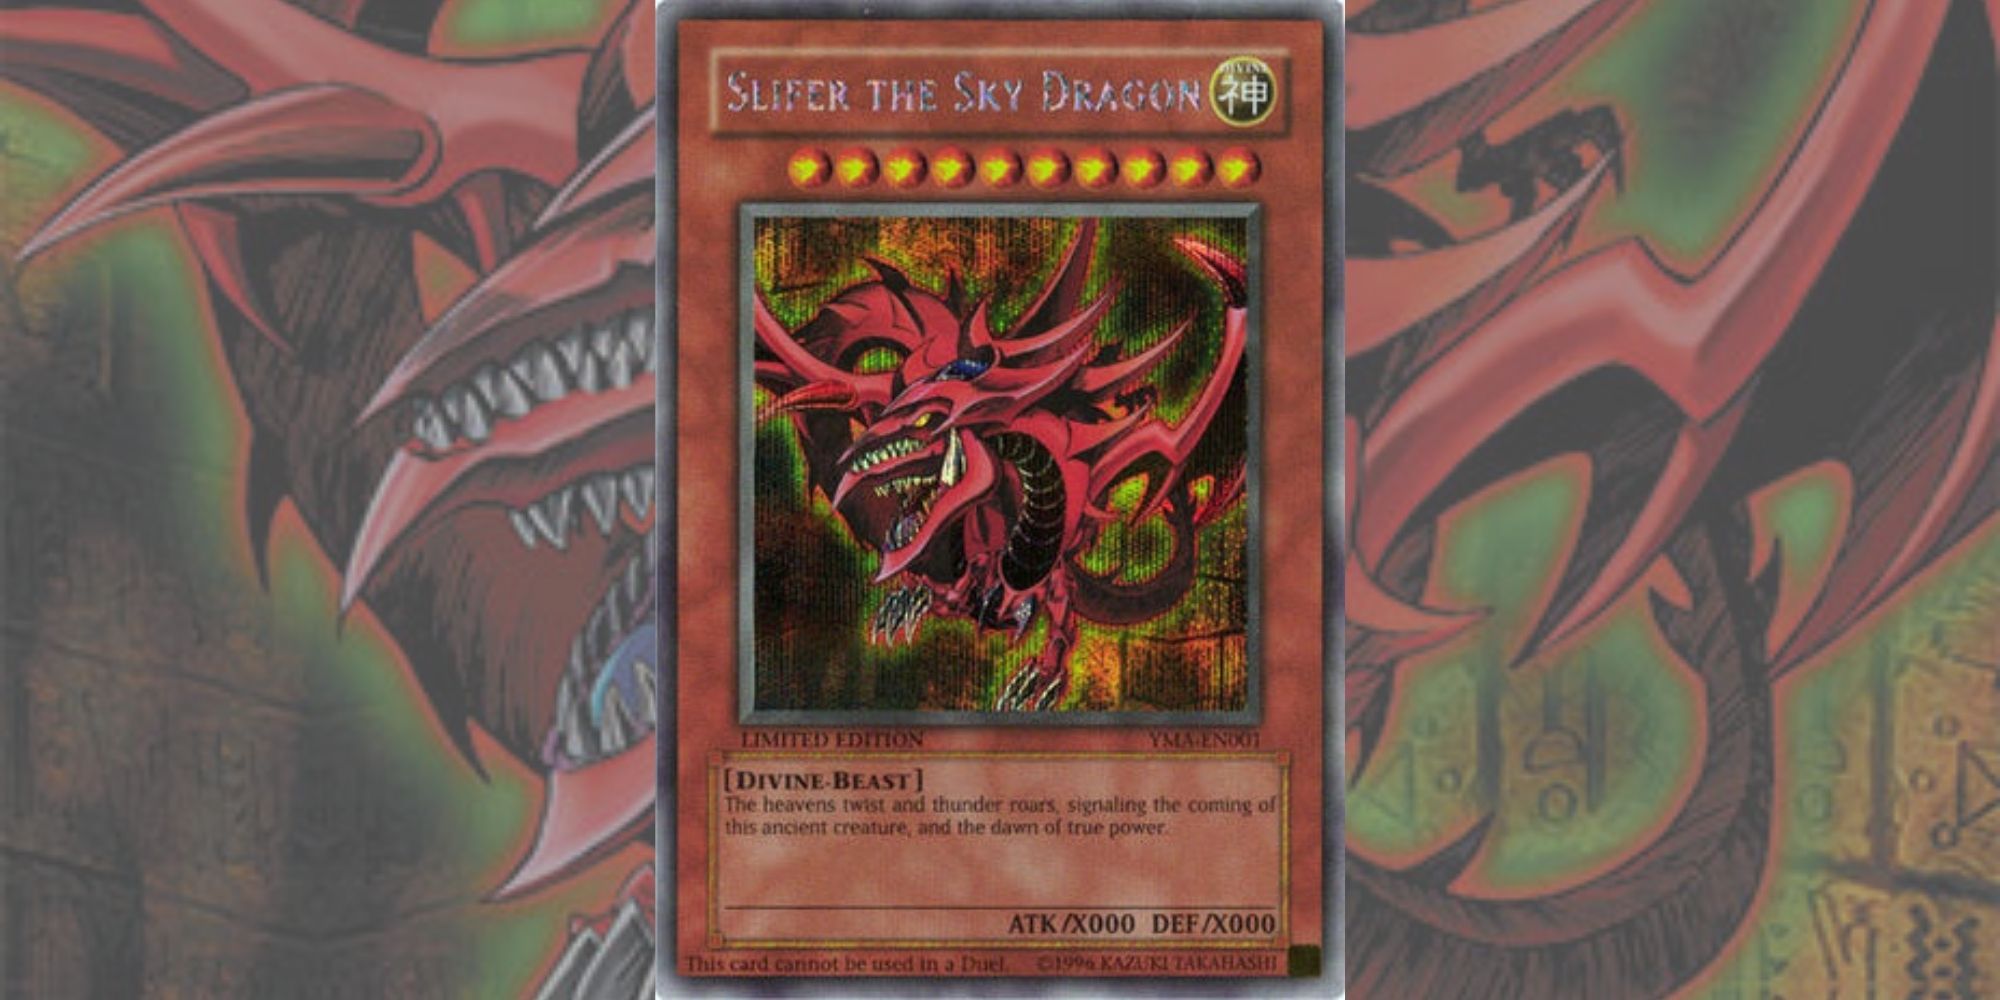 Yu-Gi-Oh! Card Slifer the Sky Dragon against background made from card art.